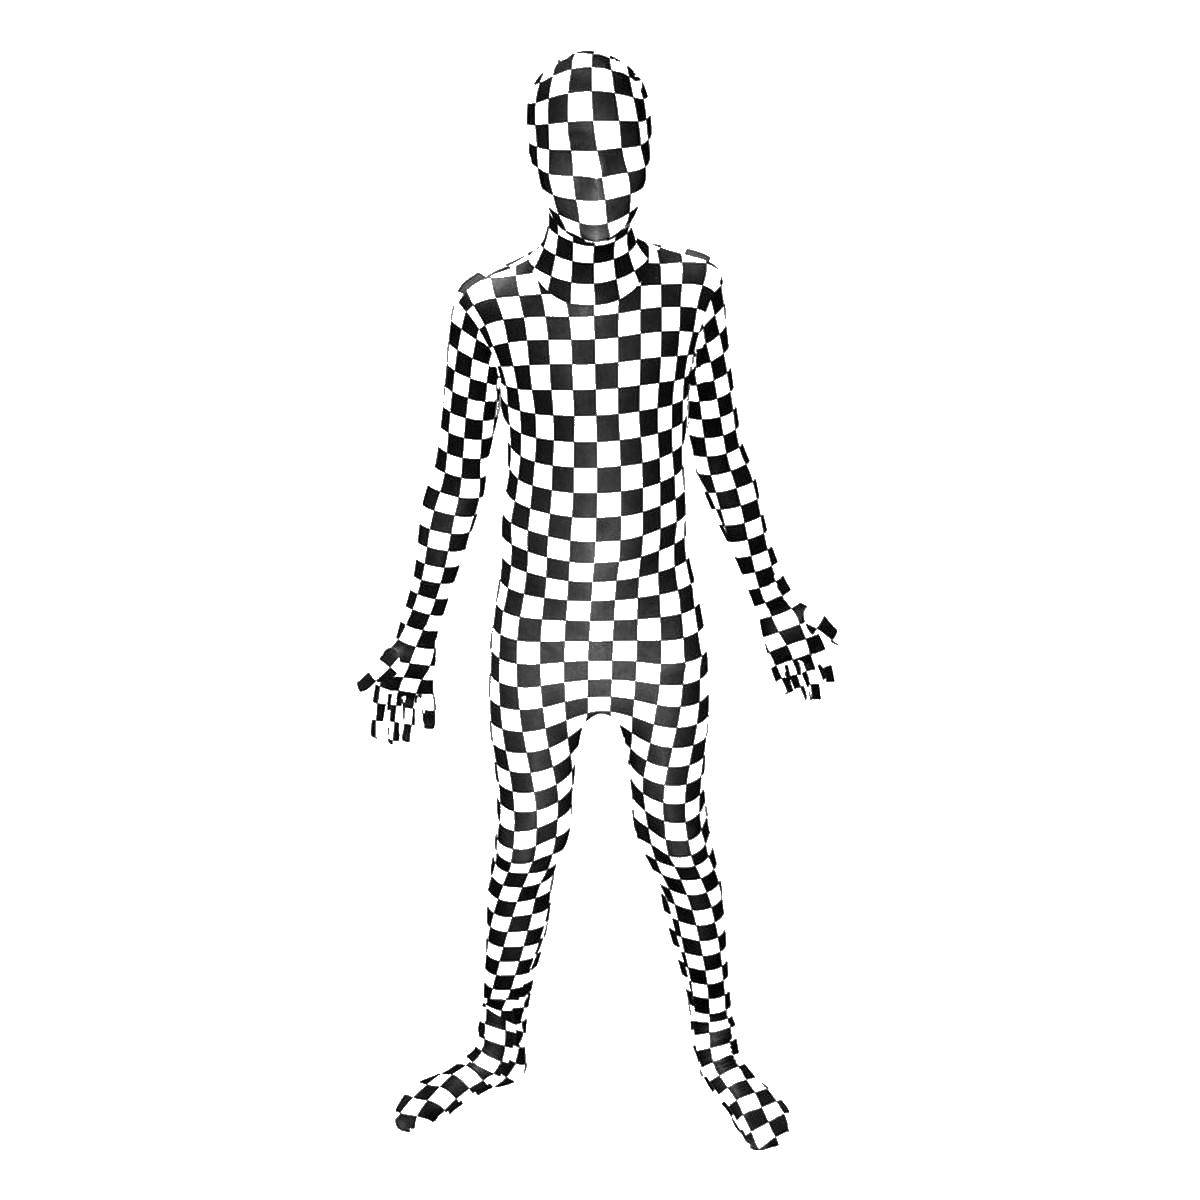 Coloring The outline of a man. Category Chess. Tags:  the outline of a man.